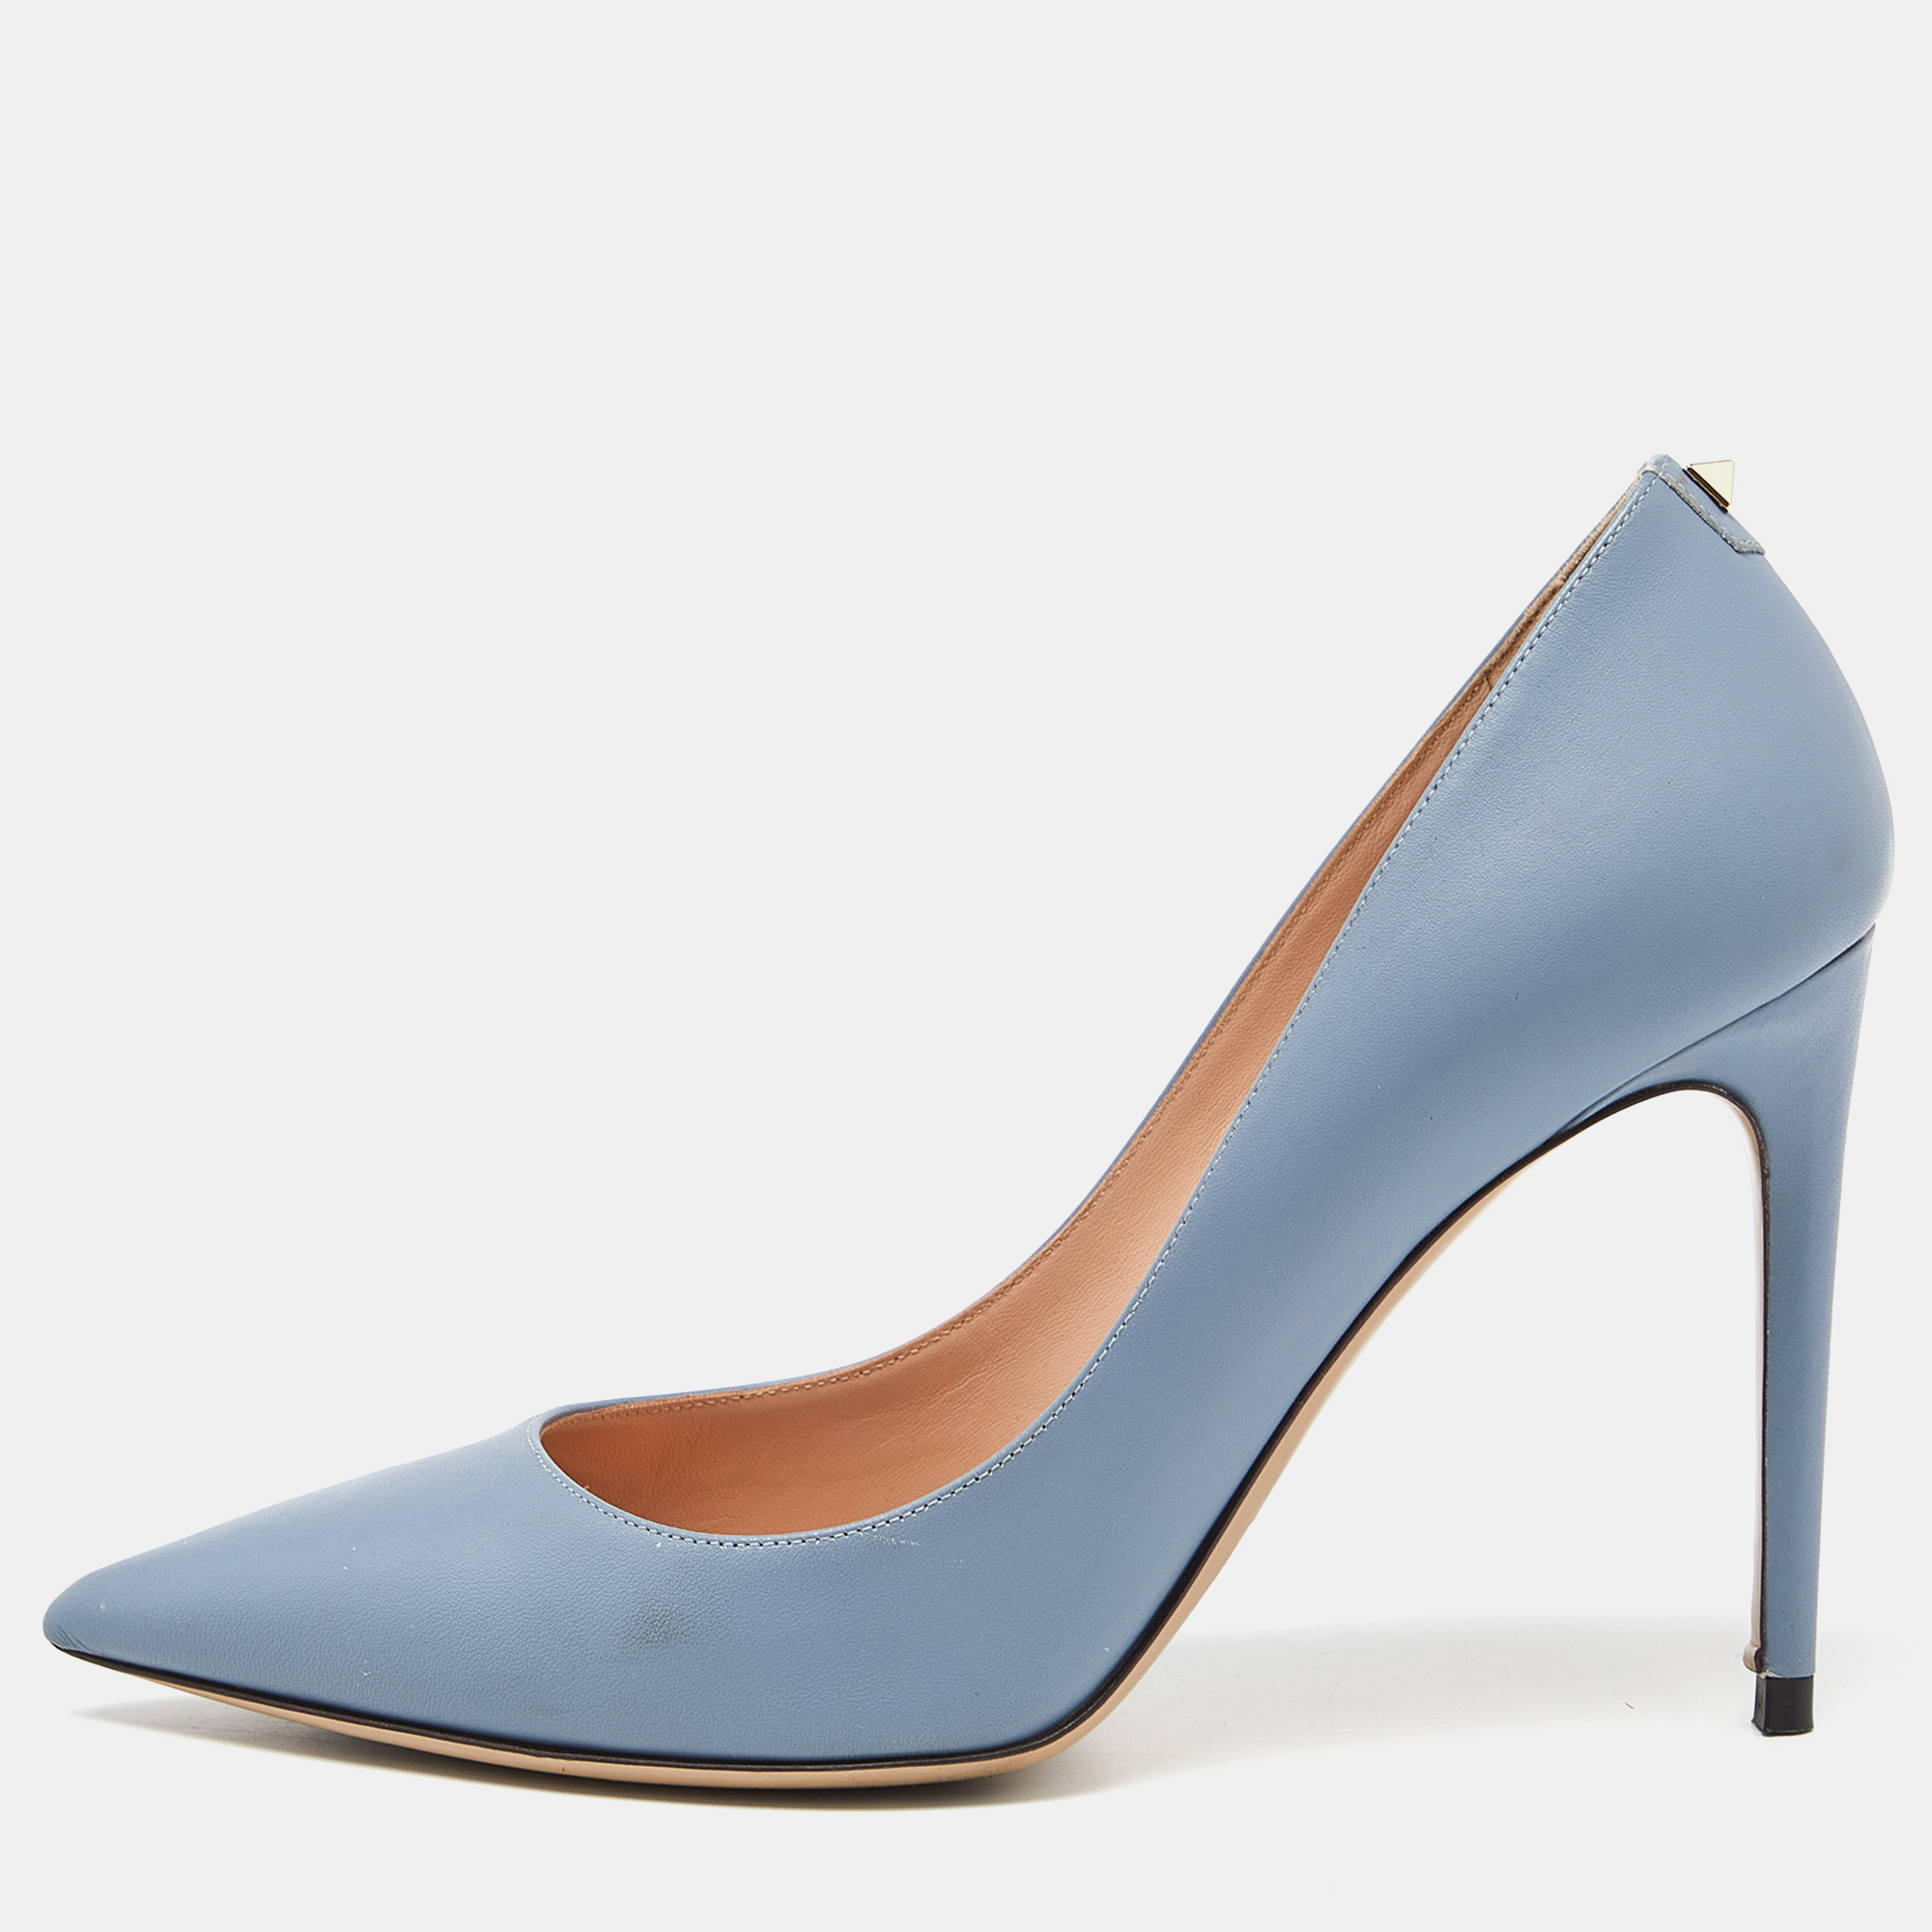 Valentino blue leather pointed toe pumps size 39.5